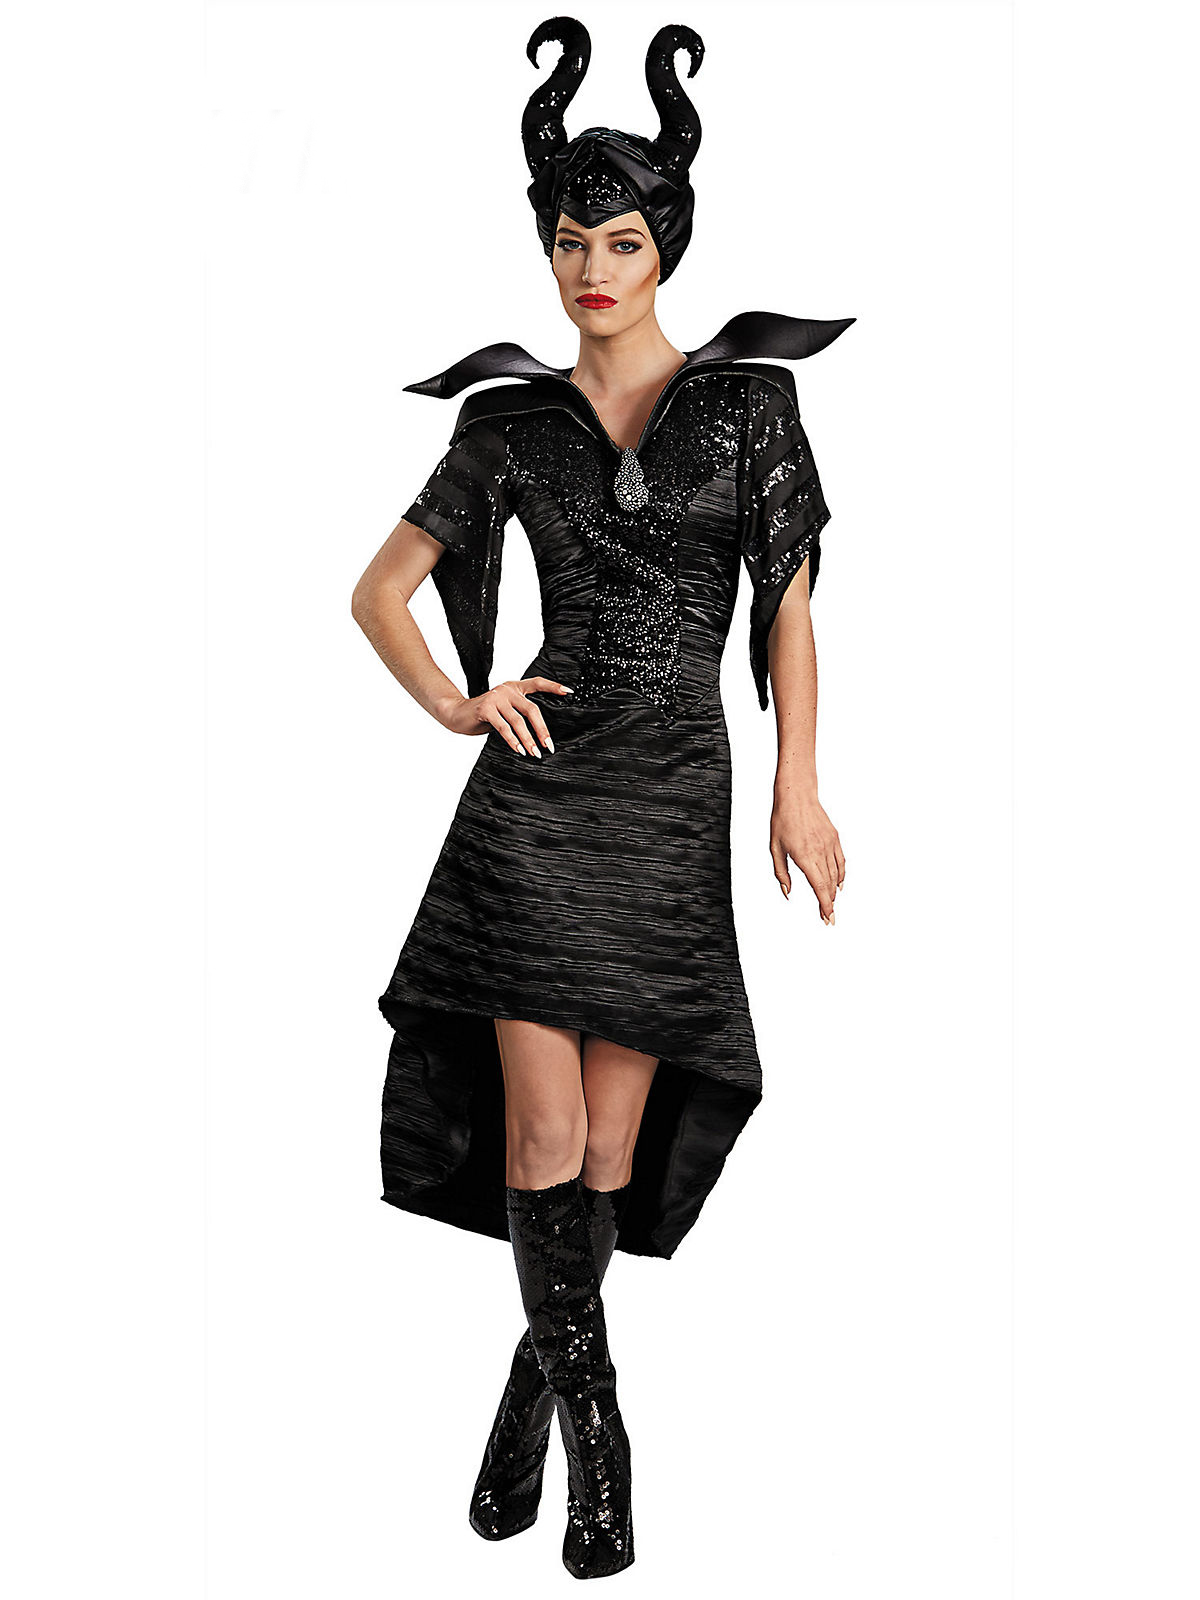 Maleficent Christening Black Gown Glam Adult Deluxe Costume - Click Image to Close